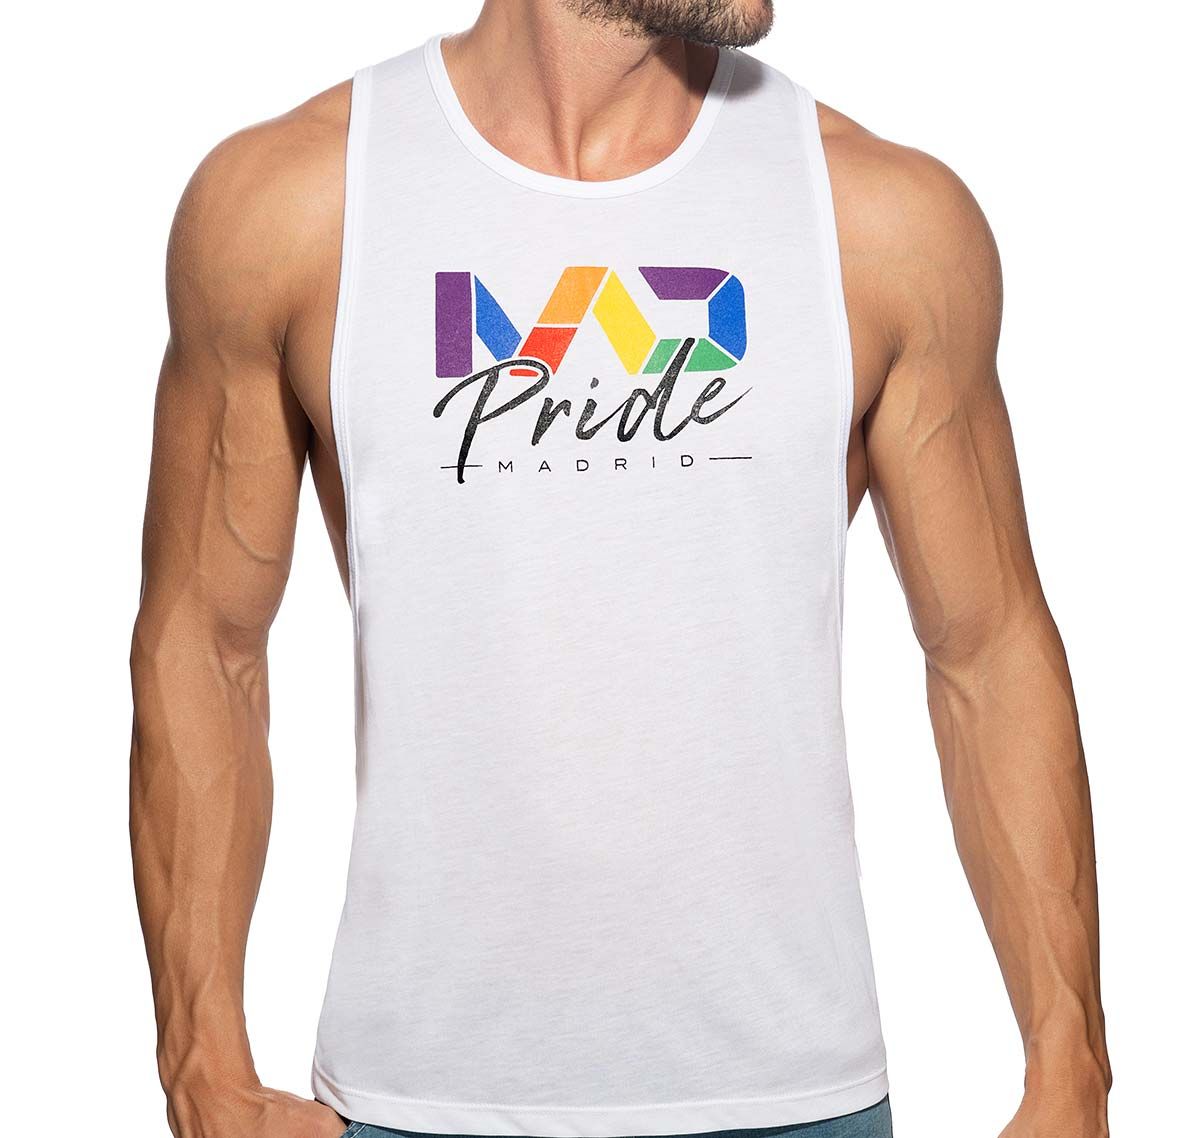 Addicted Tank Top MAD PRIDE LOW RIDER PU454, white